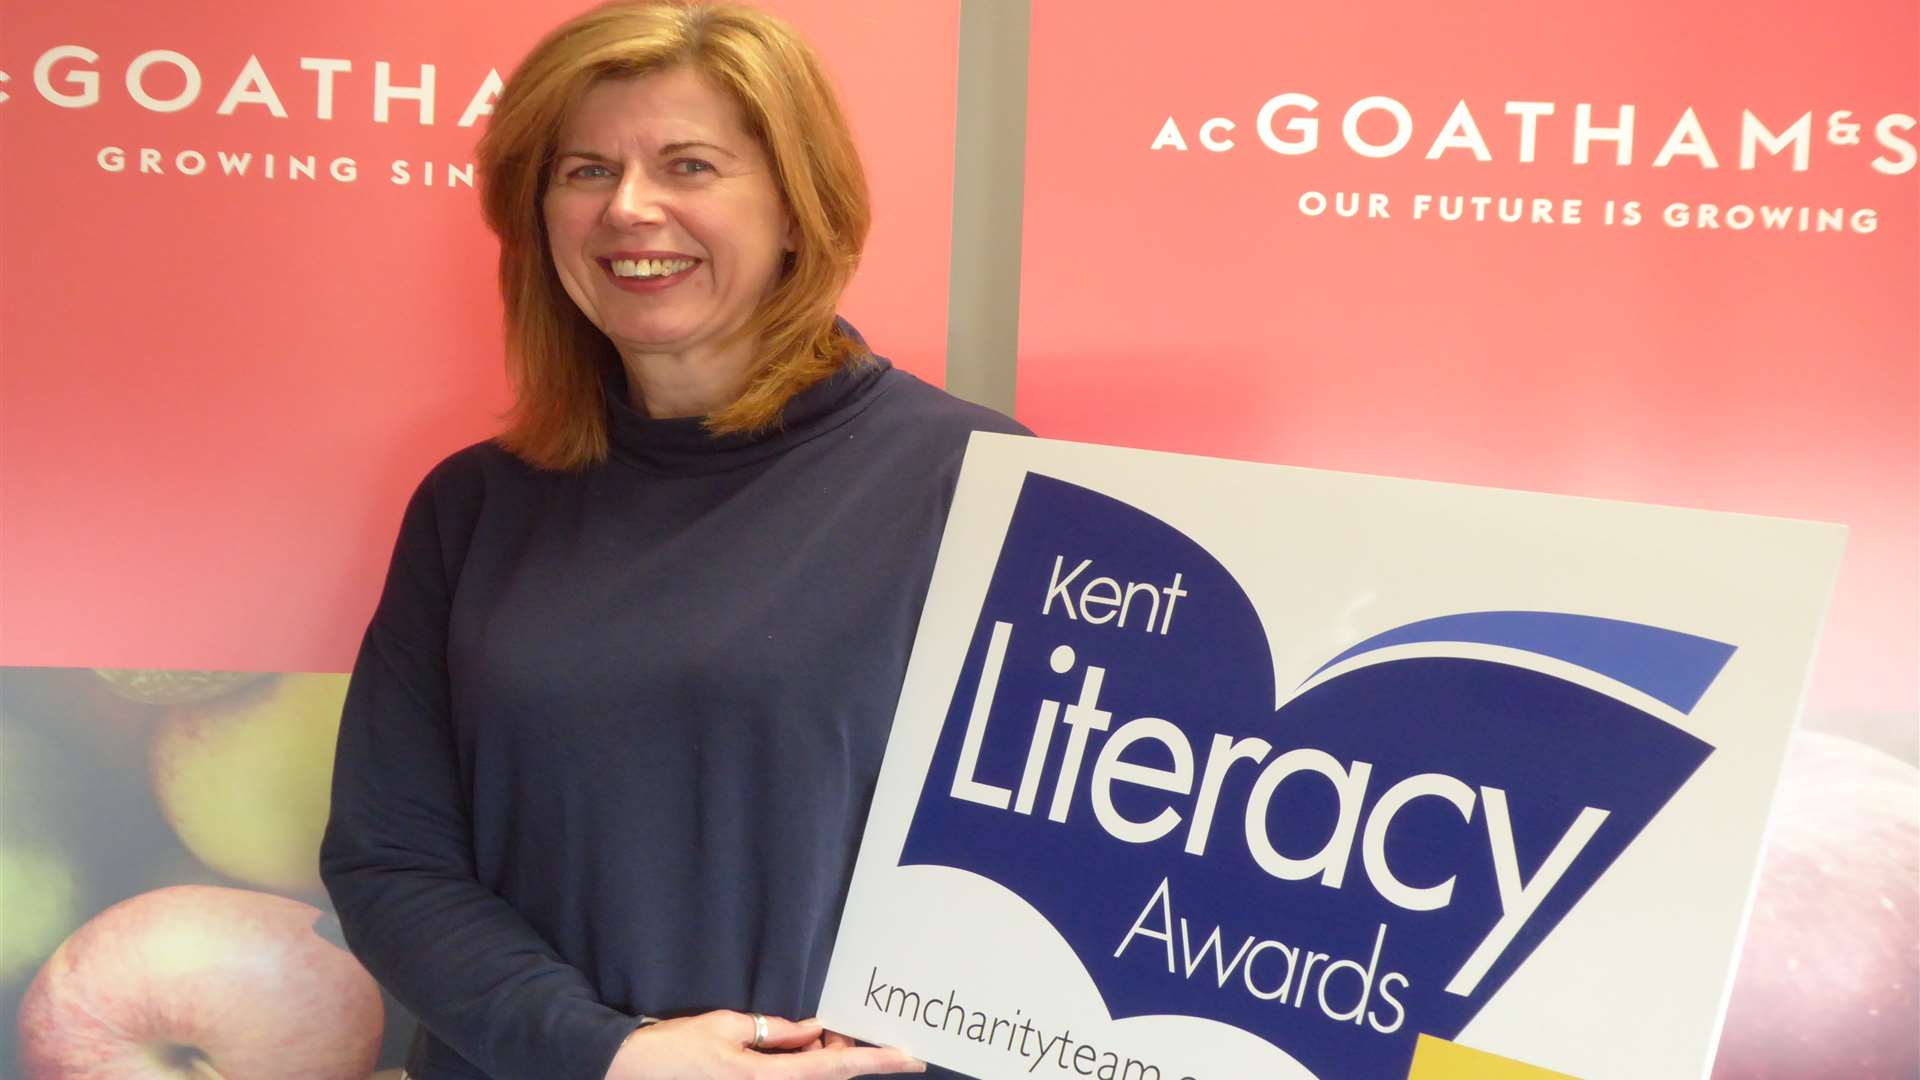 Carol Ford, Commercial Director of A.C. Goatham and Son, launches drive to attract nominations for Kent Literacy Awards.